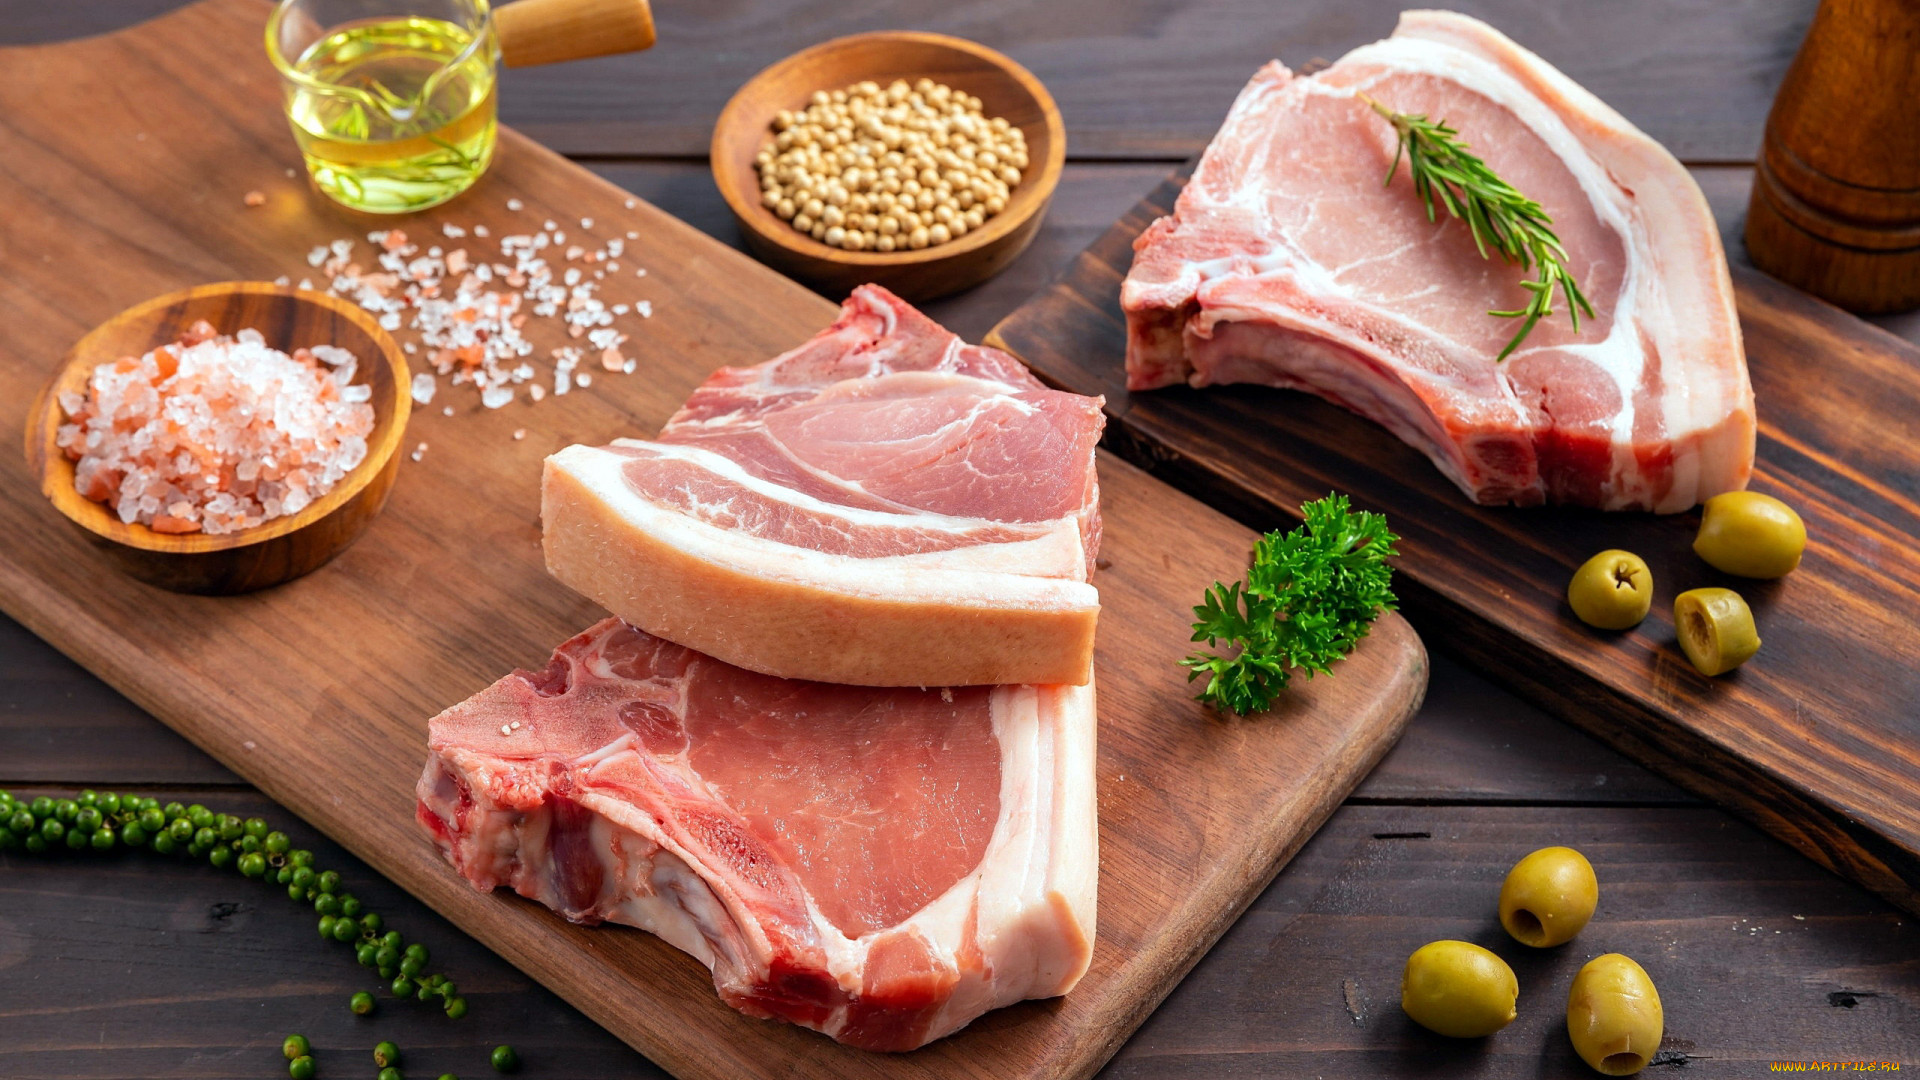 General 1920x1080 food meat olives pork cutting board salt parsley rosemary spices